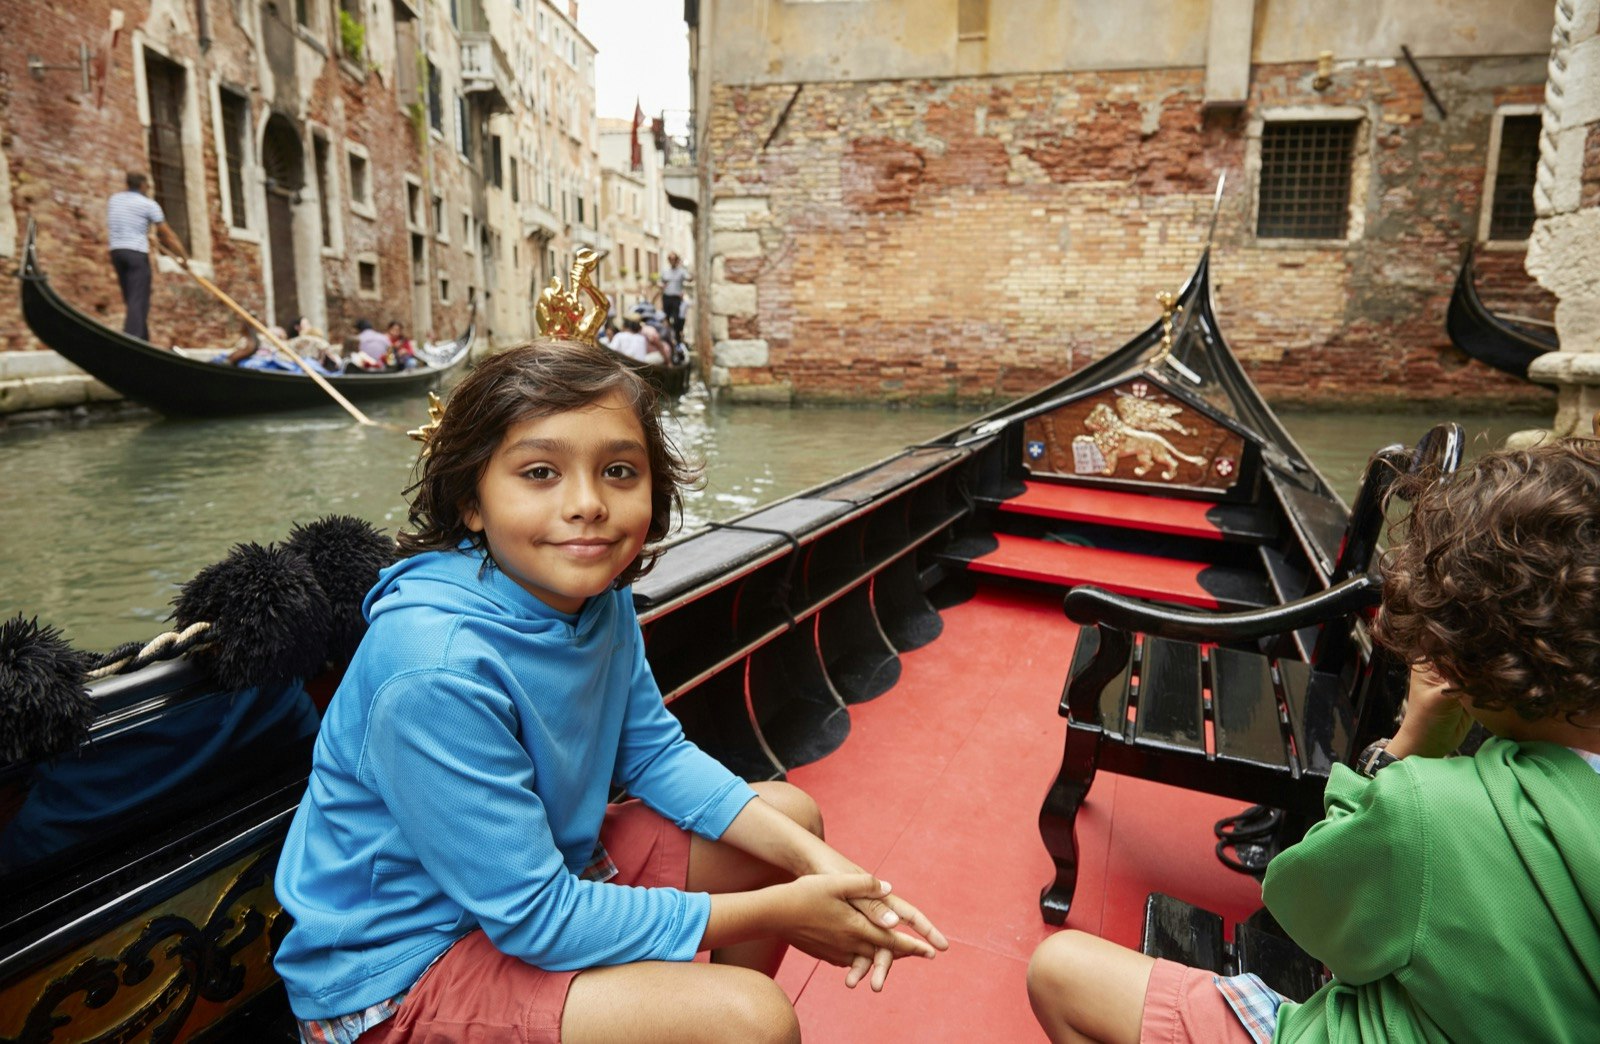 Two boys sit on a red gondola floating through Venice, one boy is looking at the camera and the other is looking away